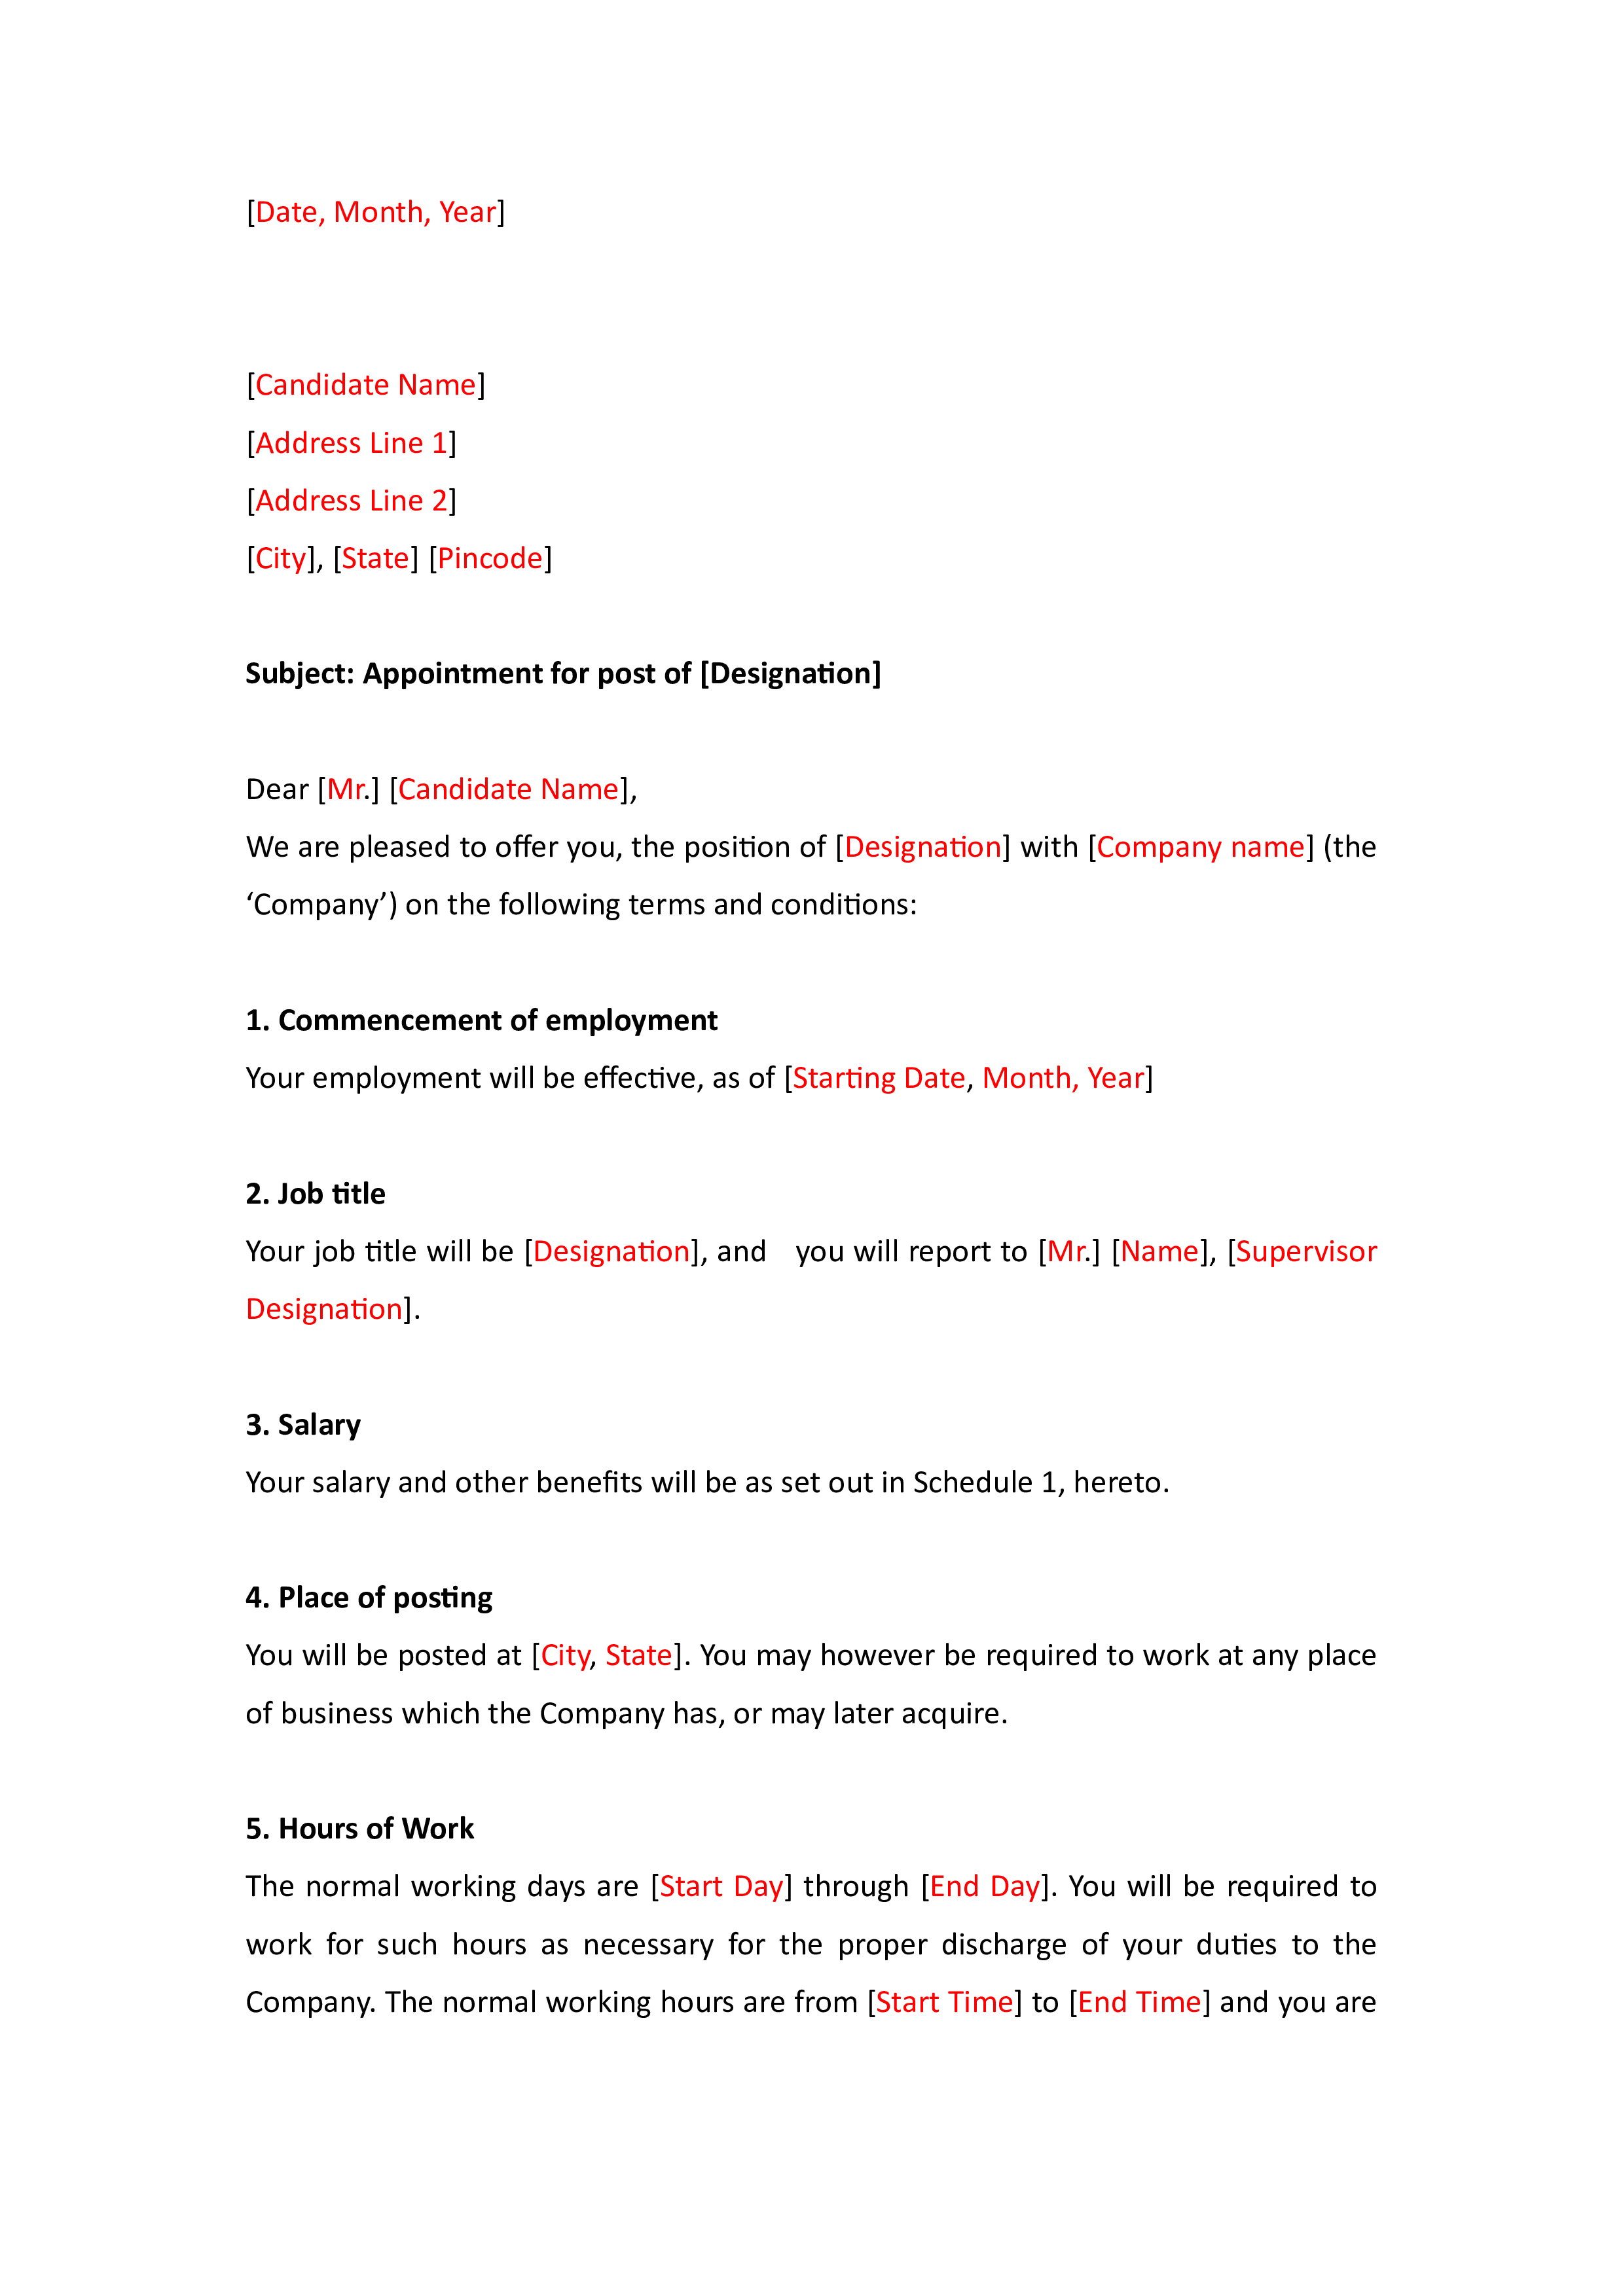 Interview Appointment Letter Format main image